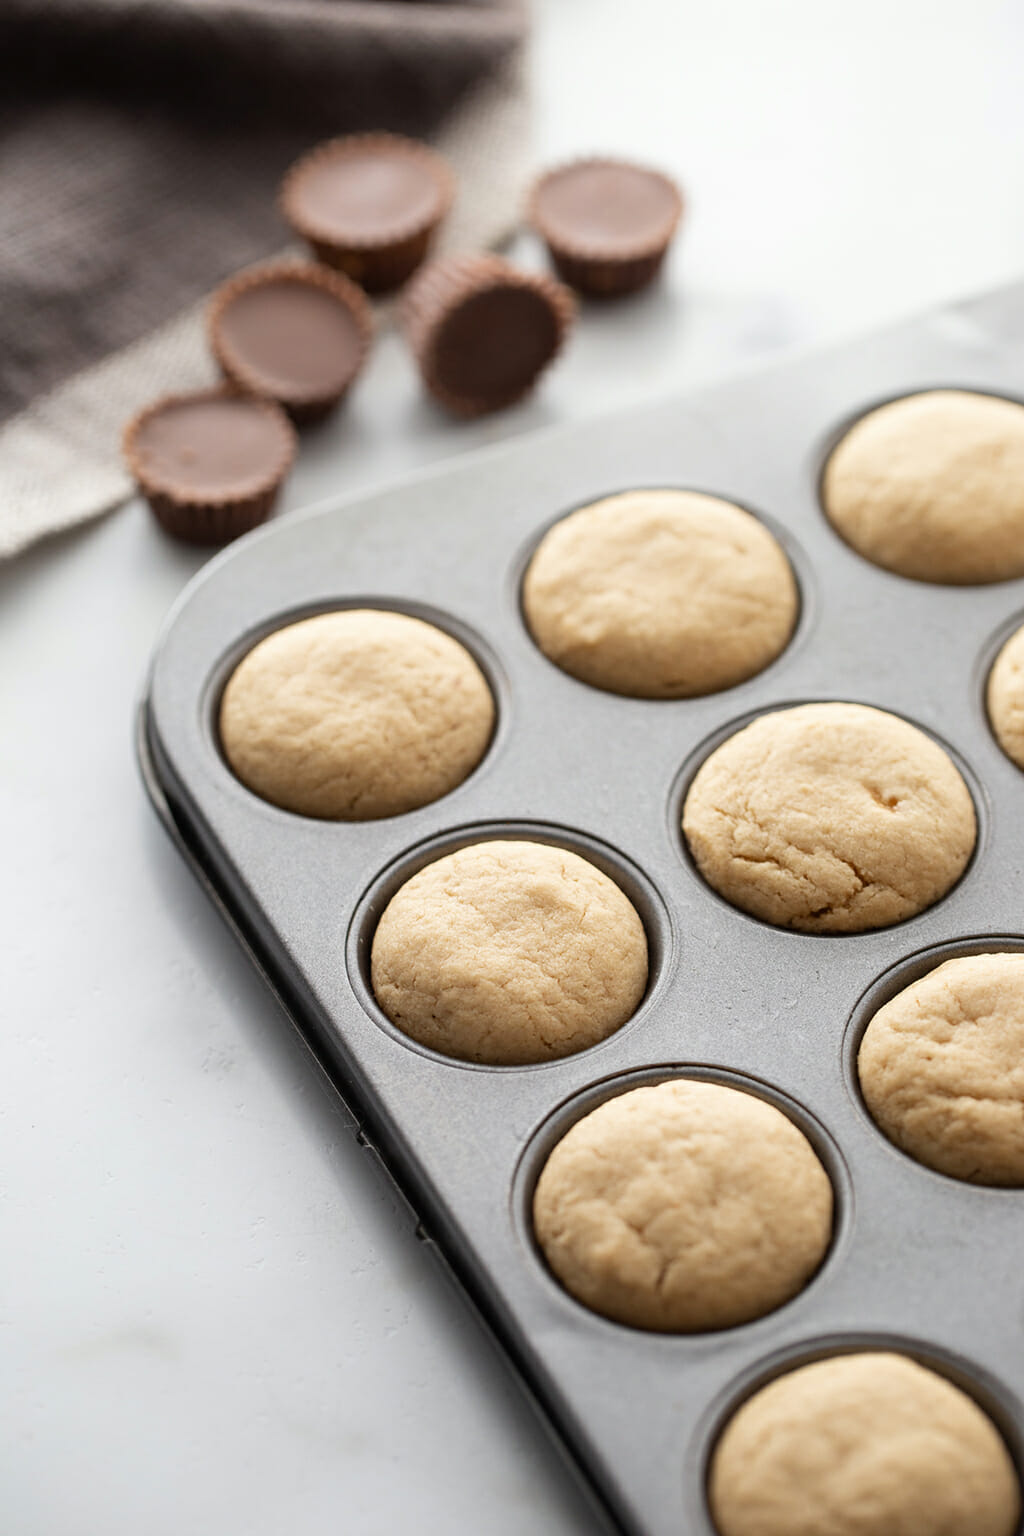 Peanut Butter Cup Cookie dougn in a muffin tin before cooking